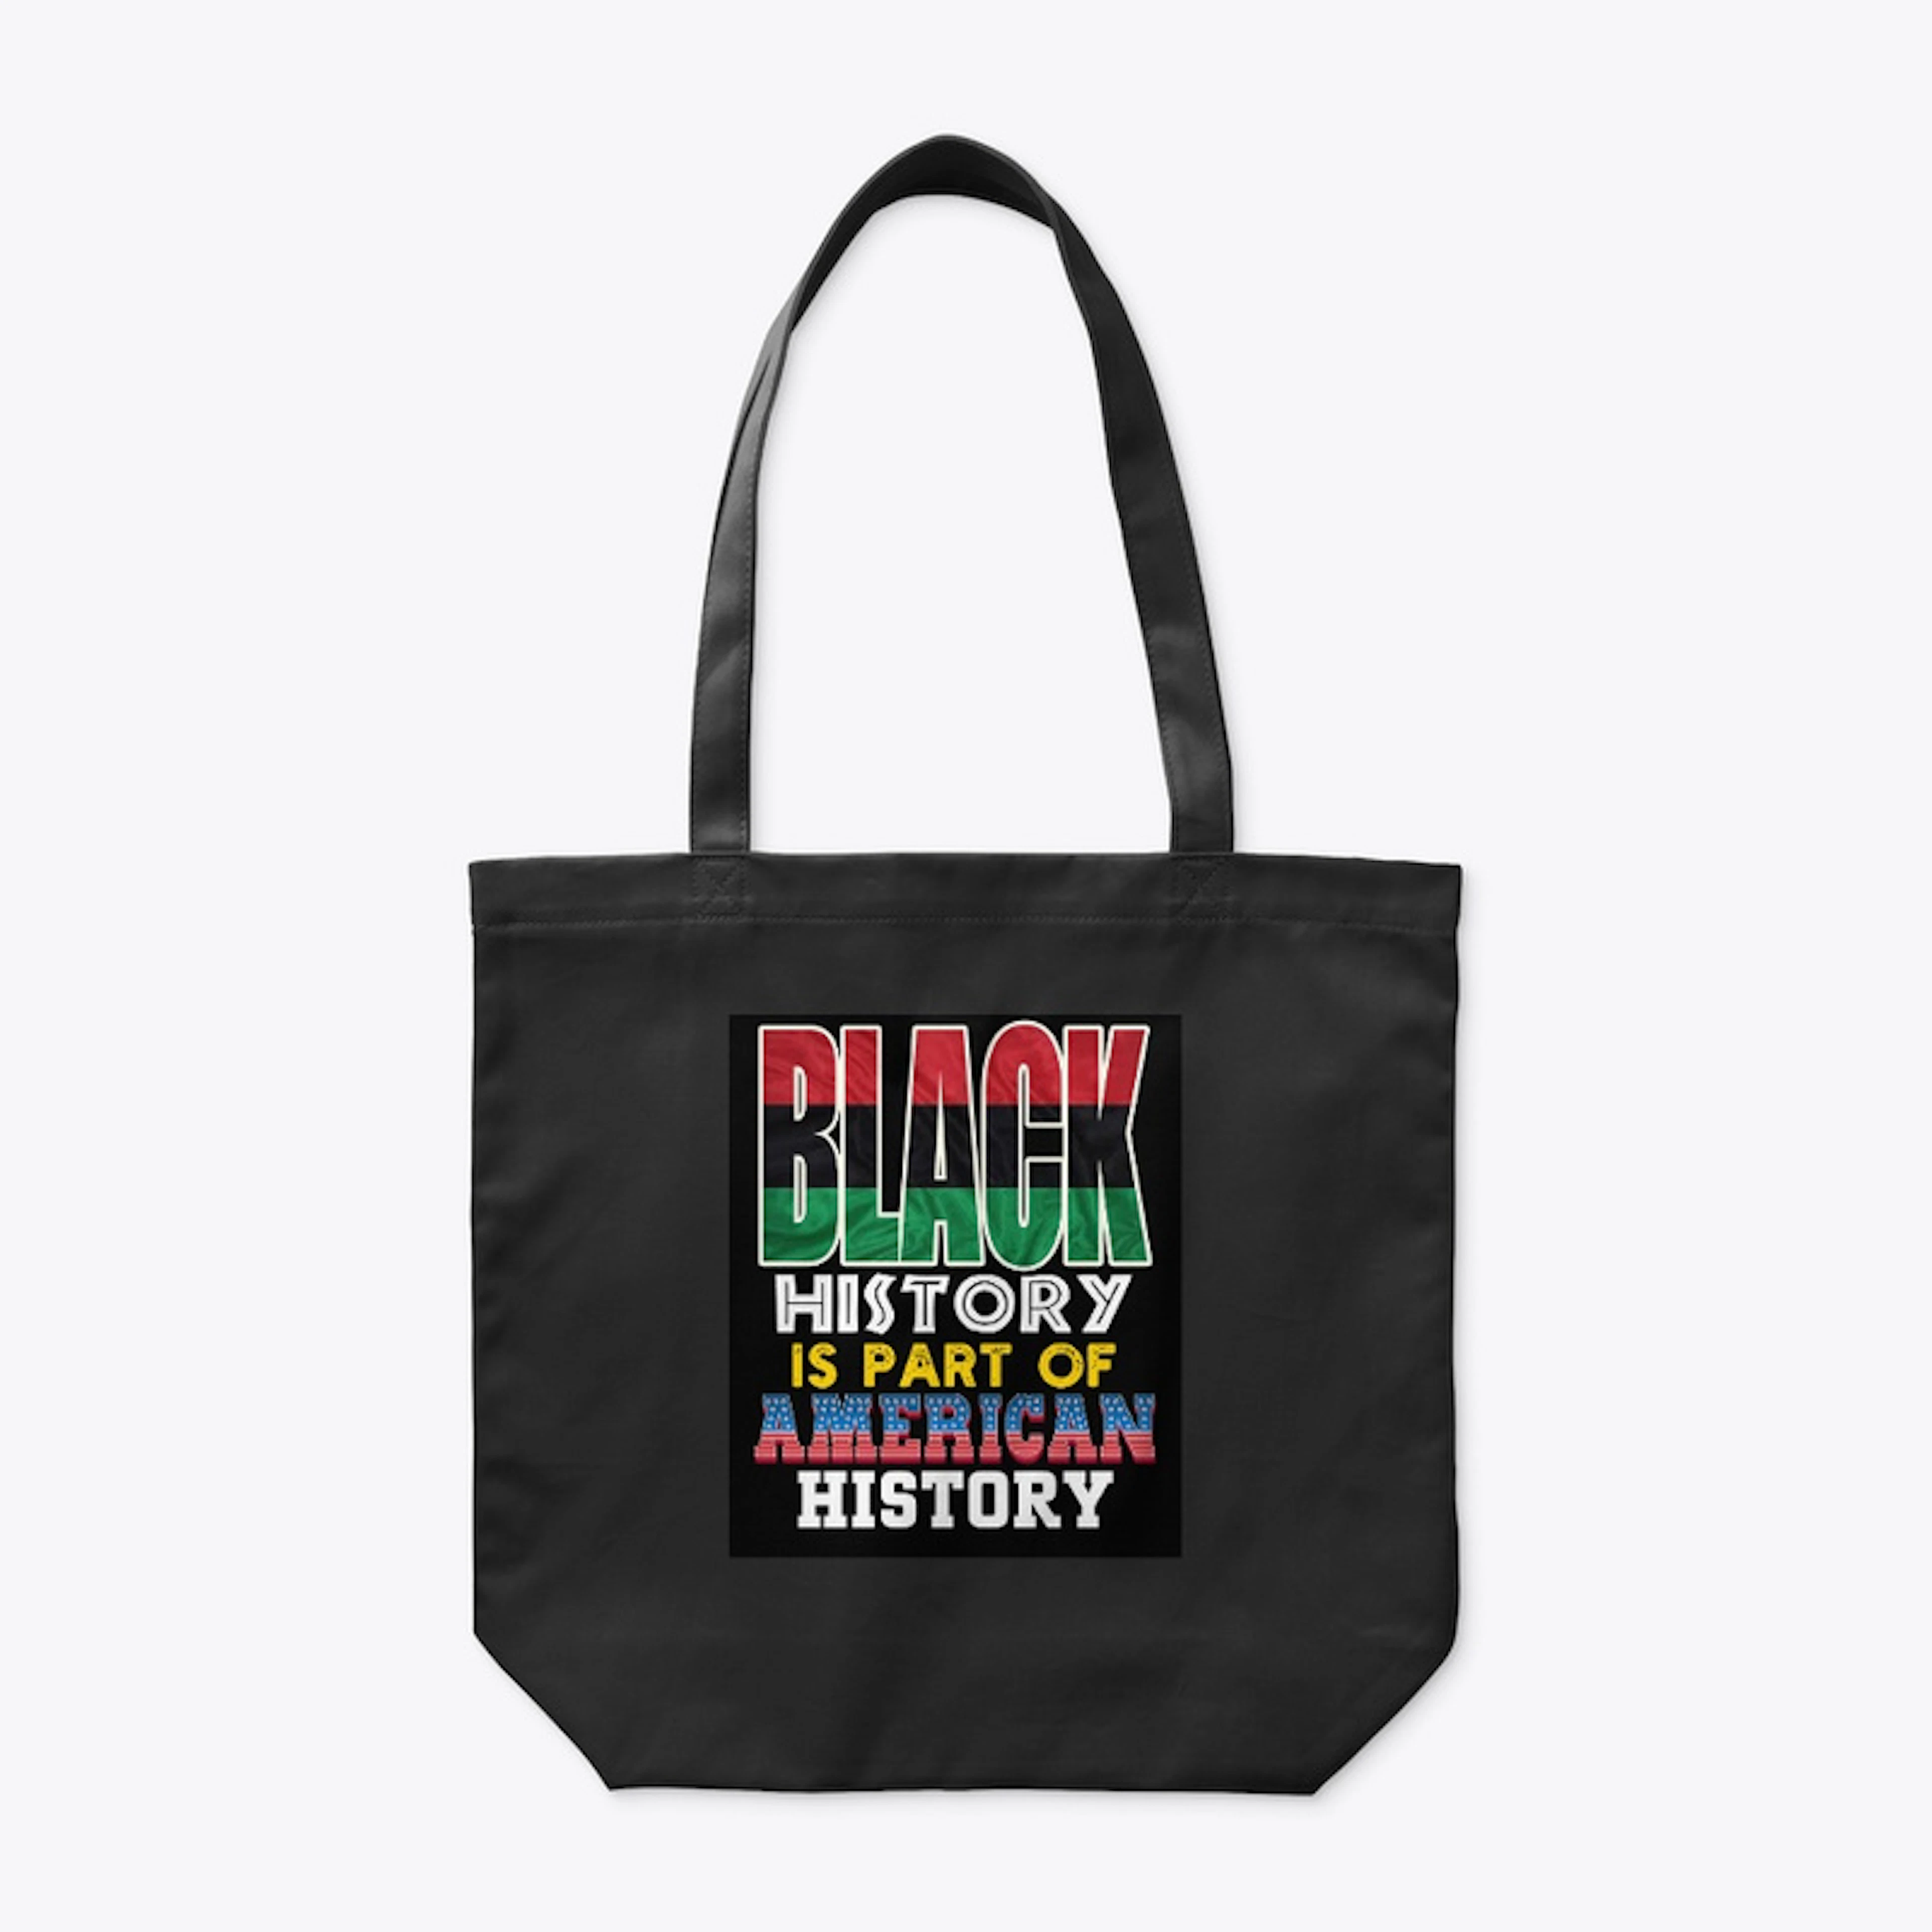 Black history s part of American history